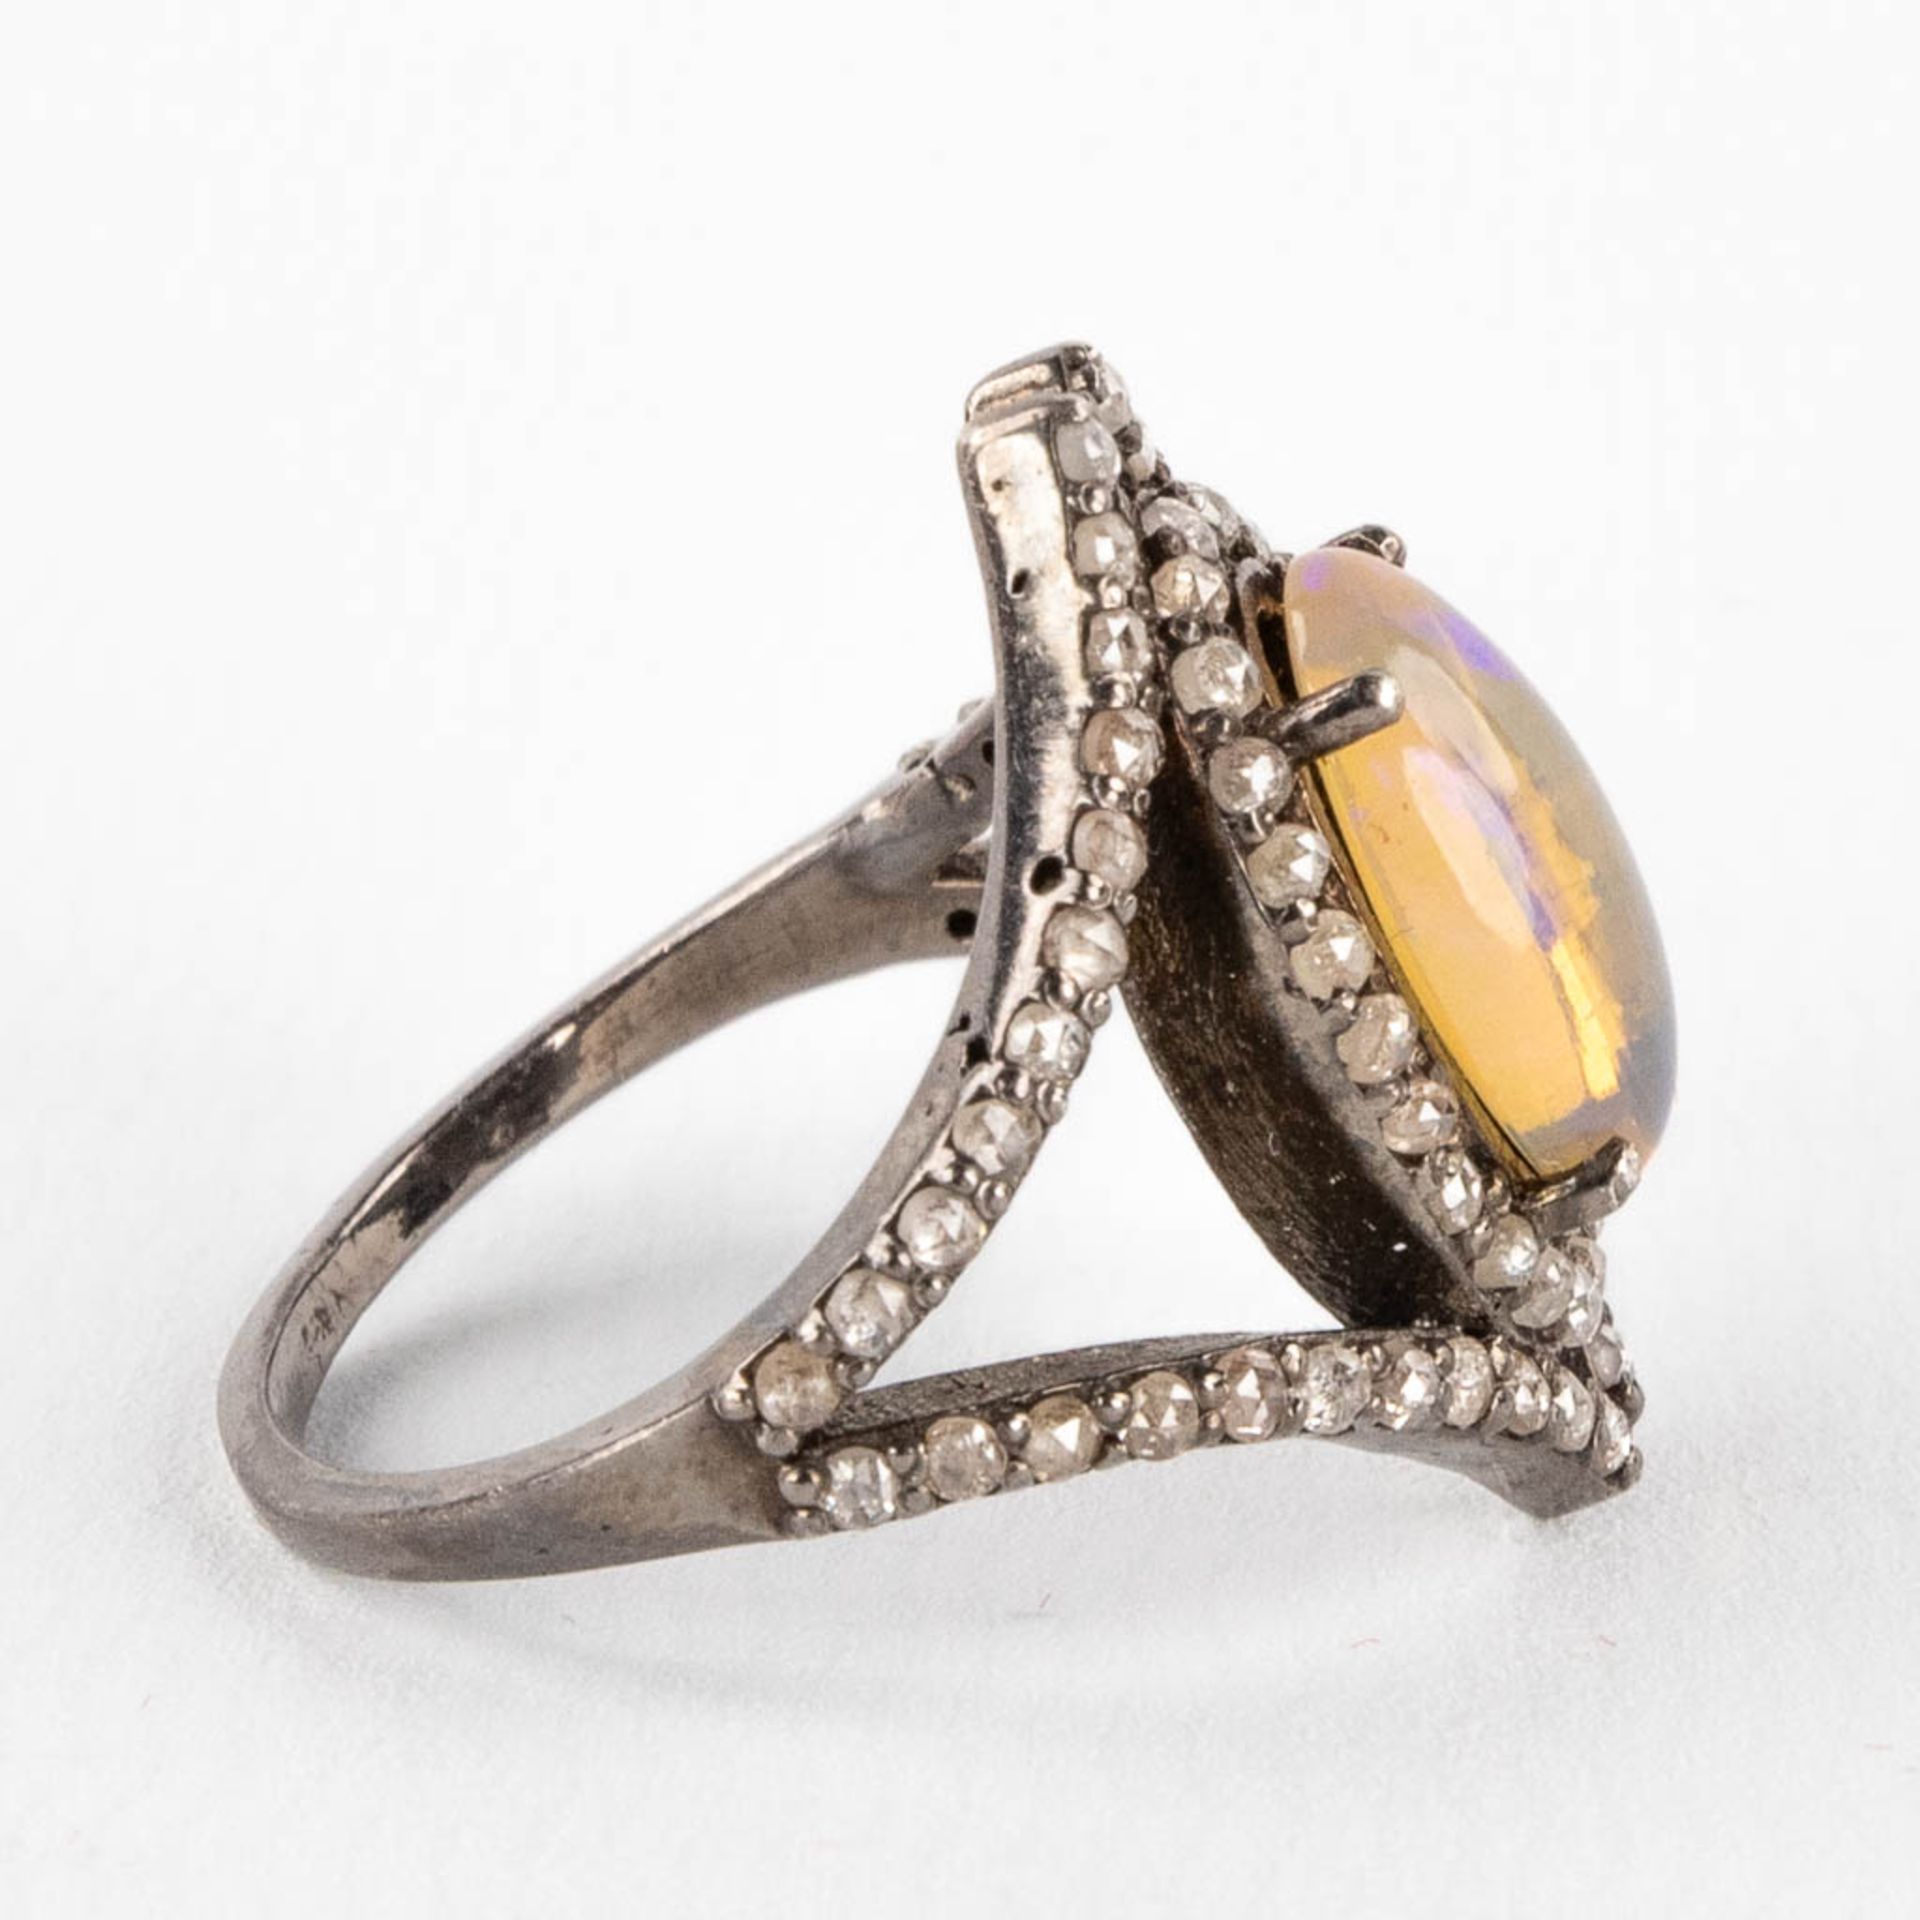 A ring with central opal stone and uncut diamonds, silver. 6,43g. Ring size 63. - Image 8 of 9